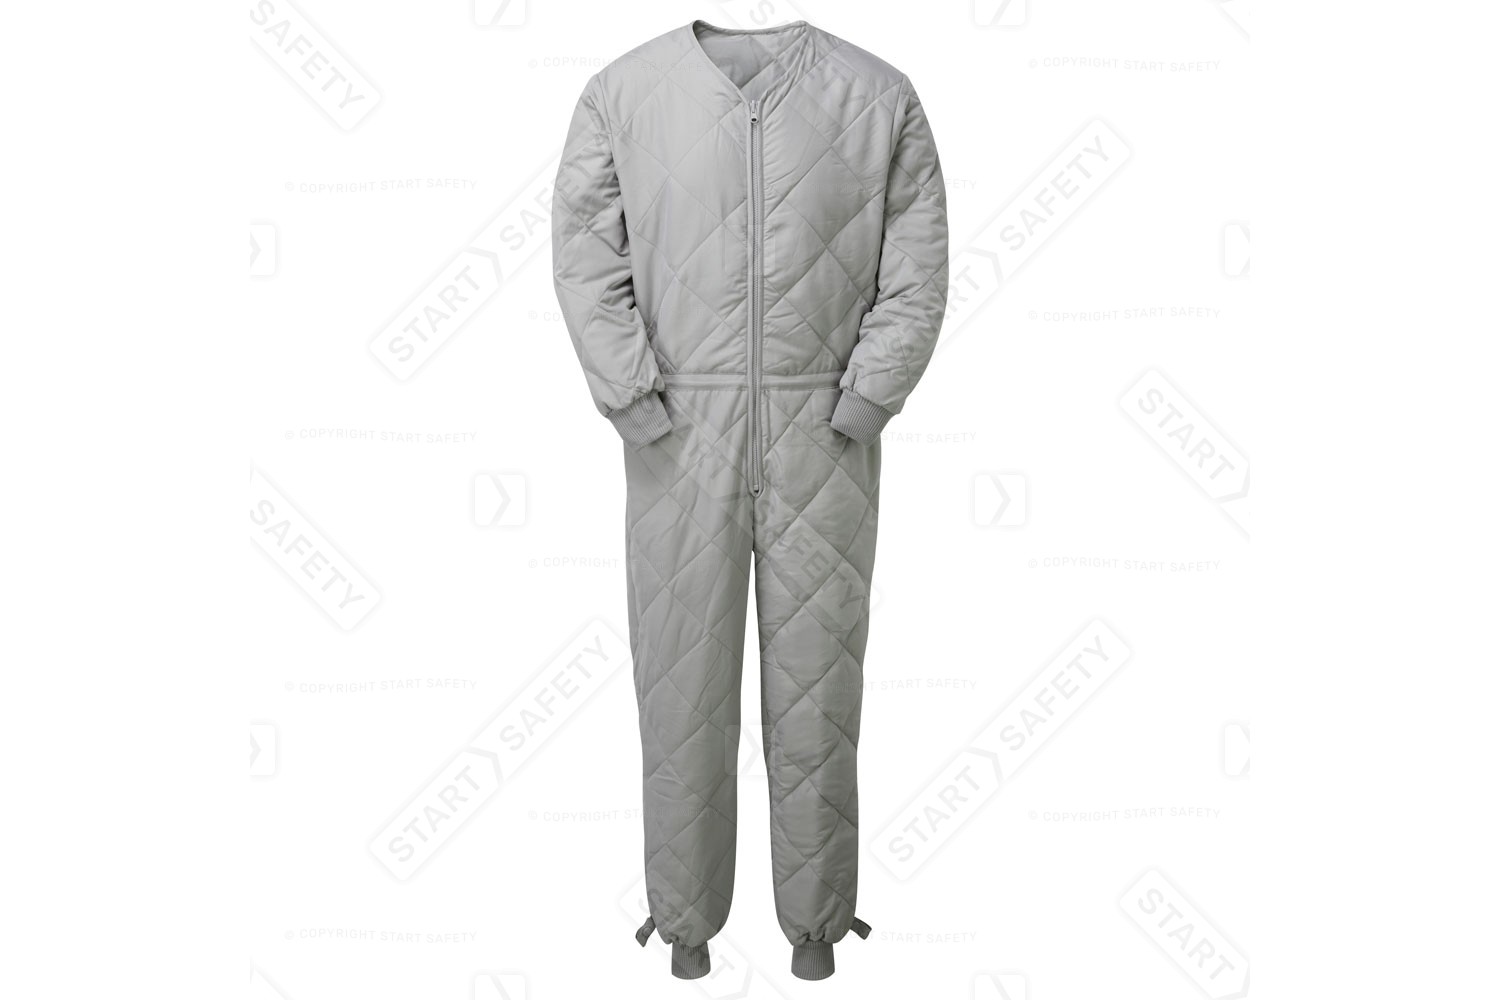 Additional Thermal Liner For Work Overalls